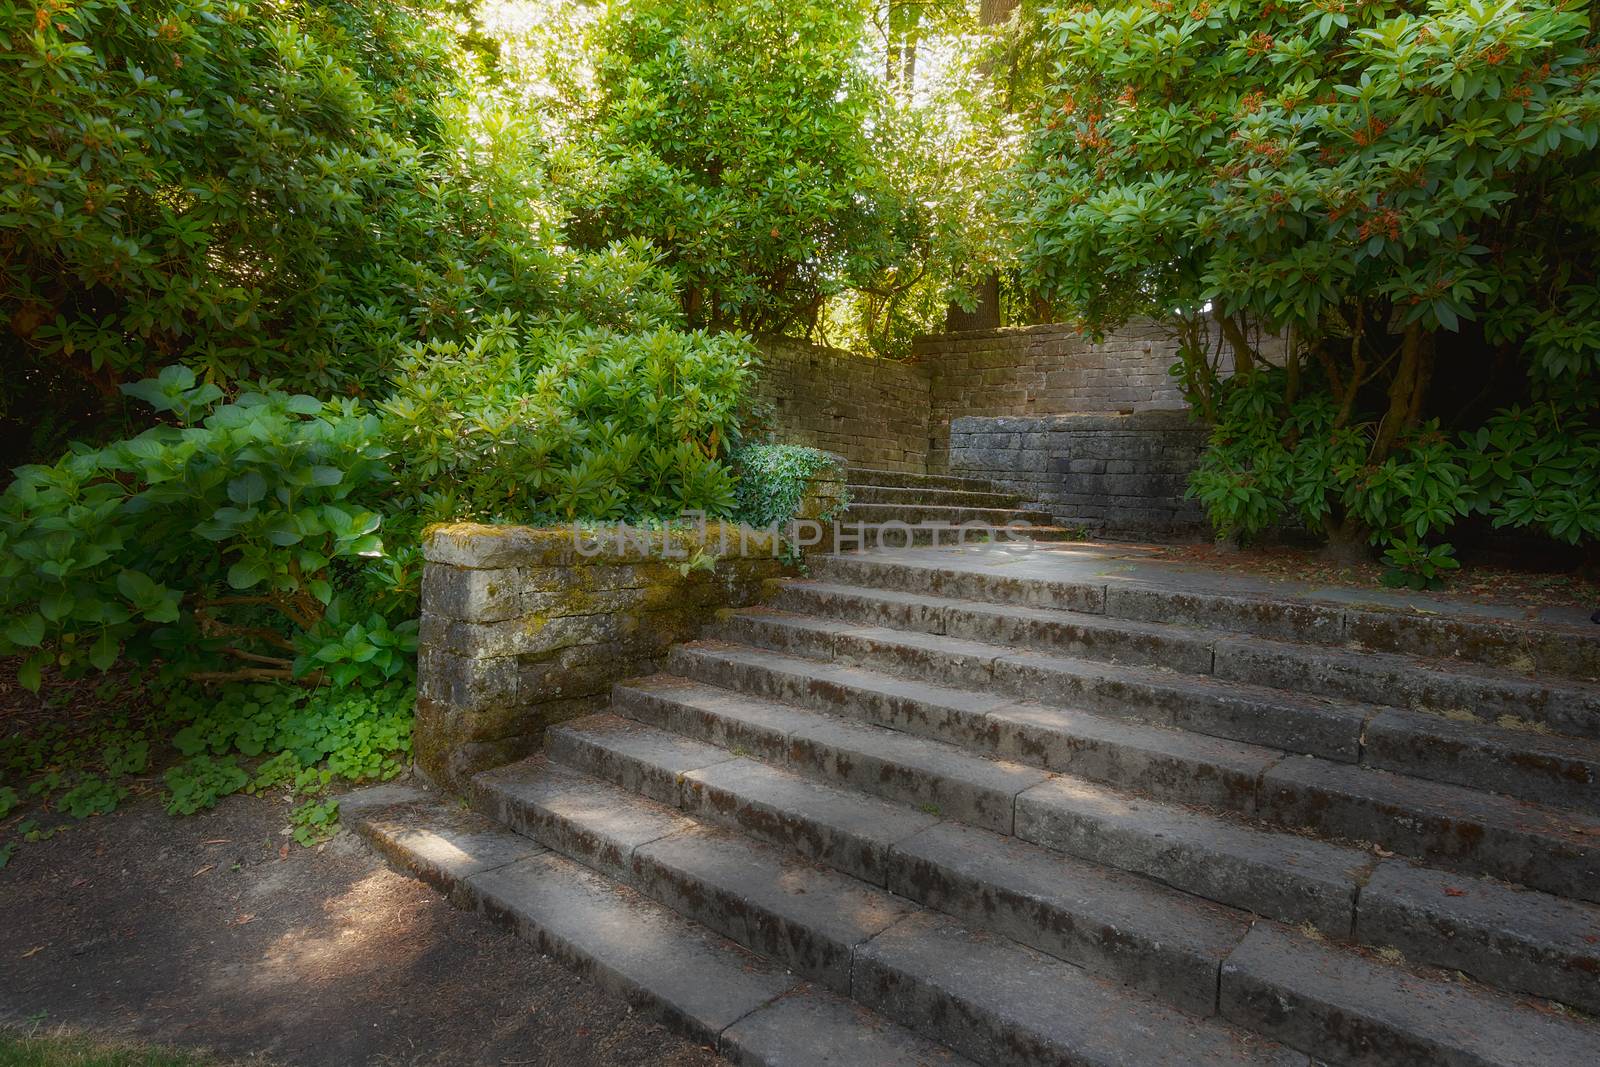 Old garden stone walls and stair steps with lush greenery shrubs plants in filtered sunlight